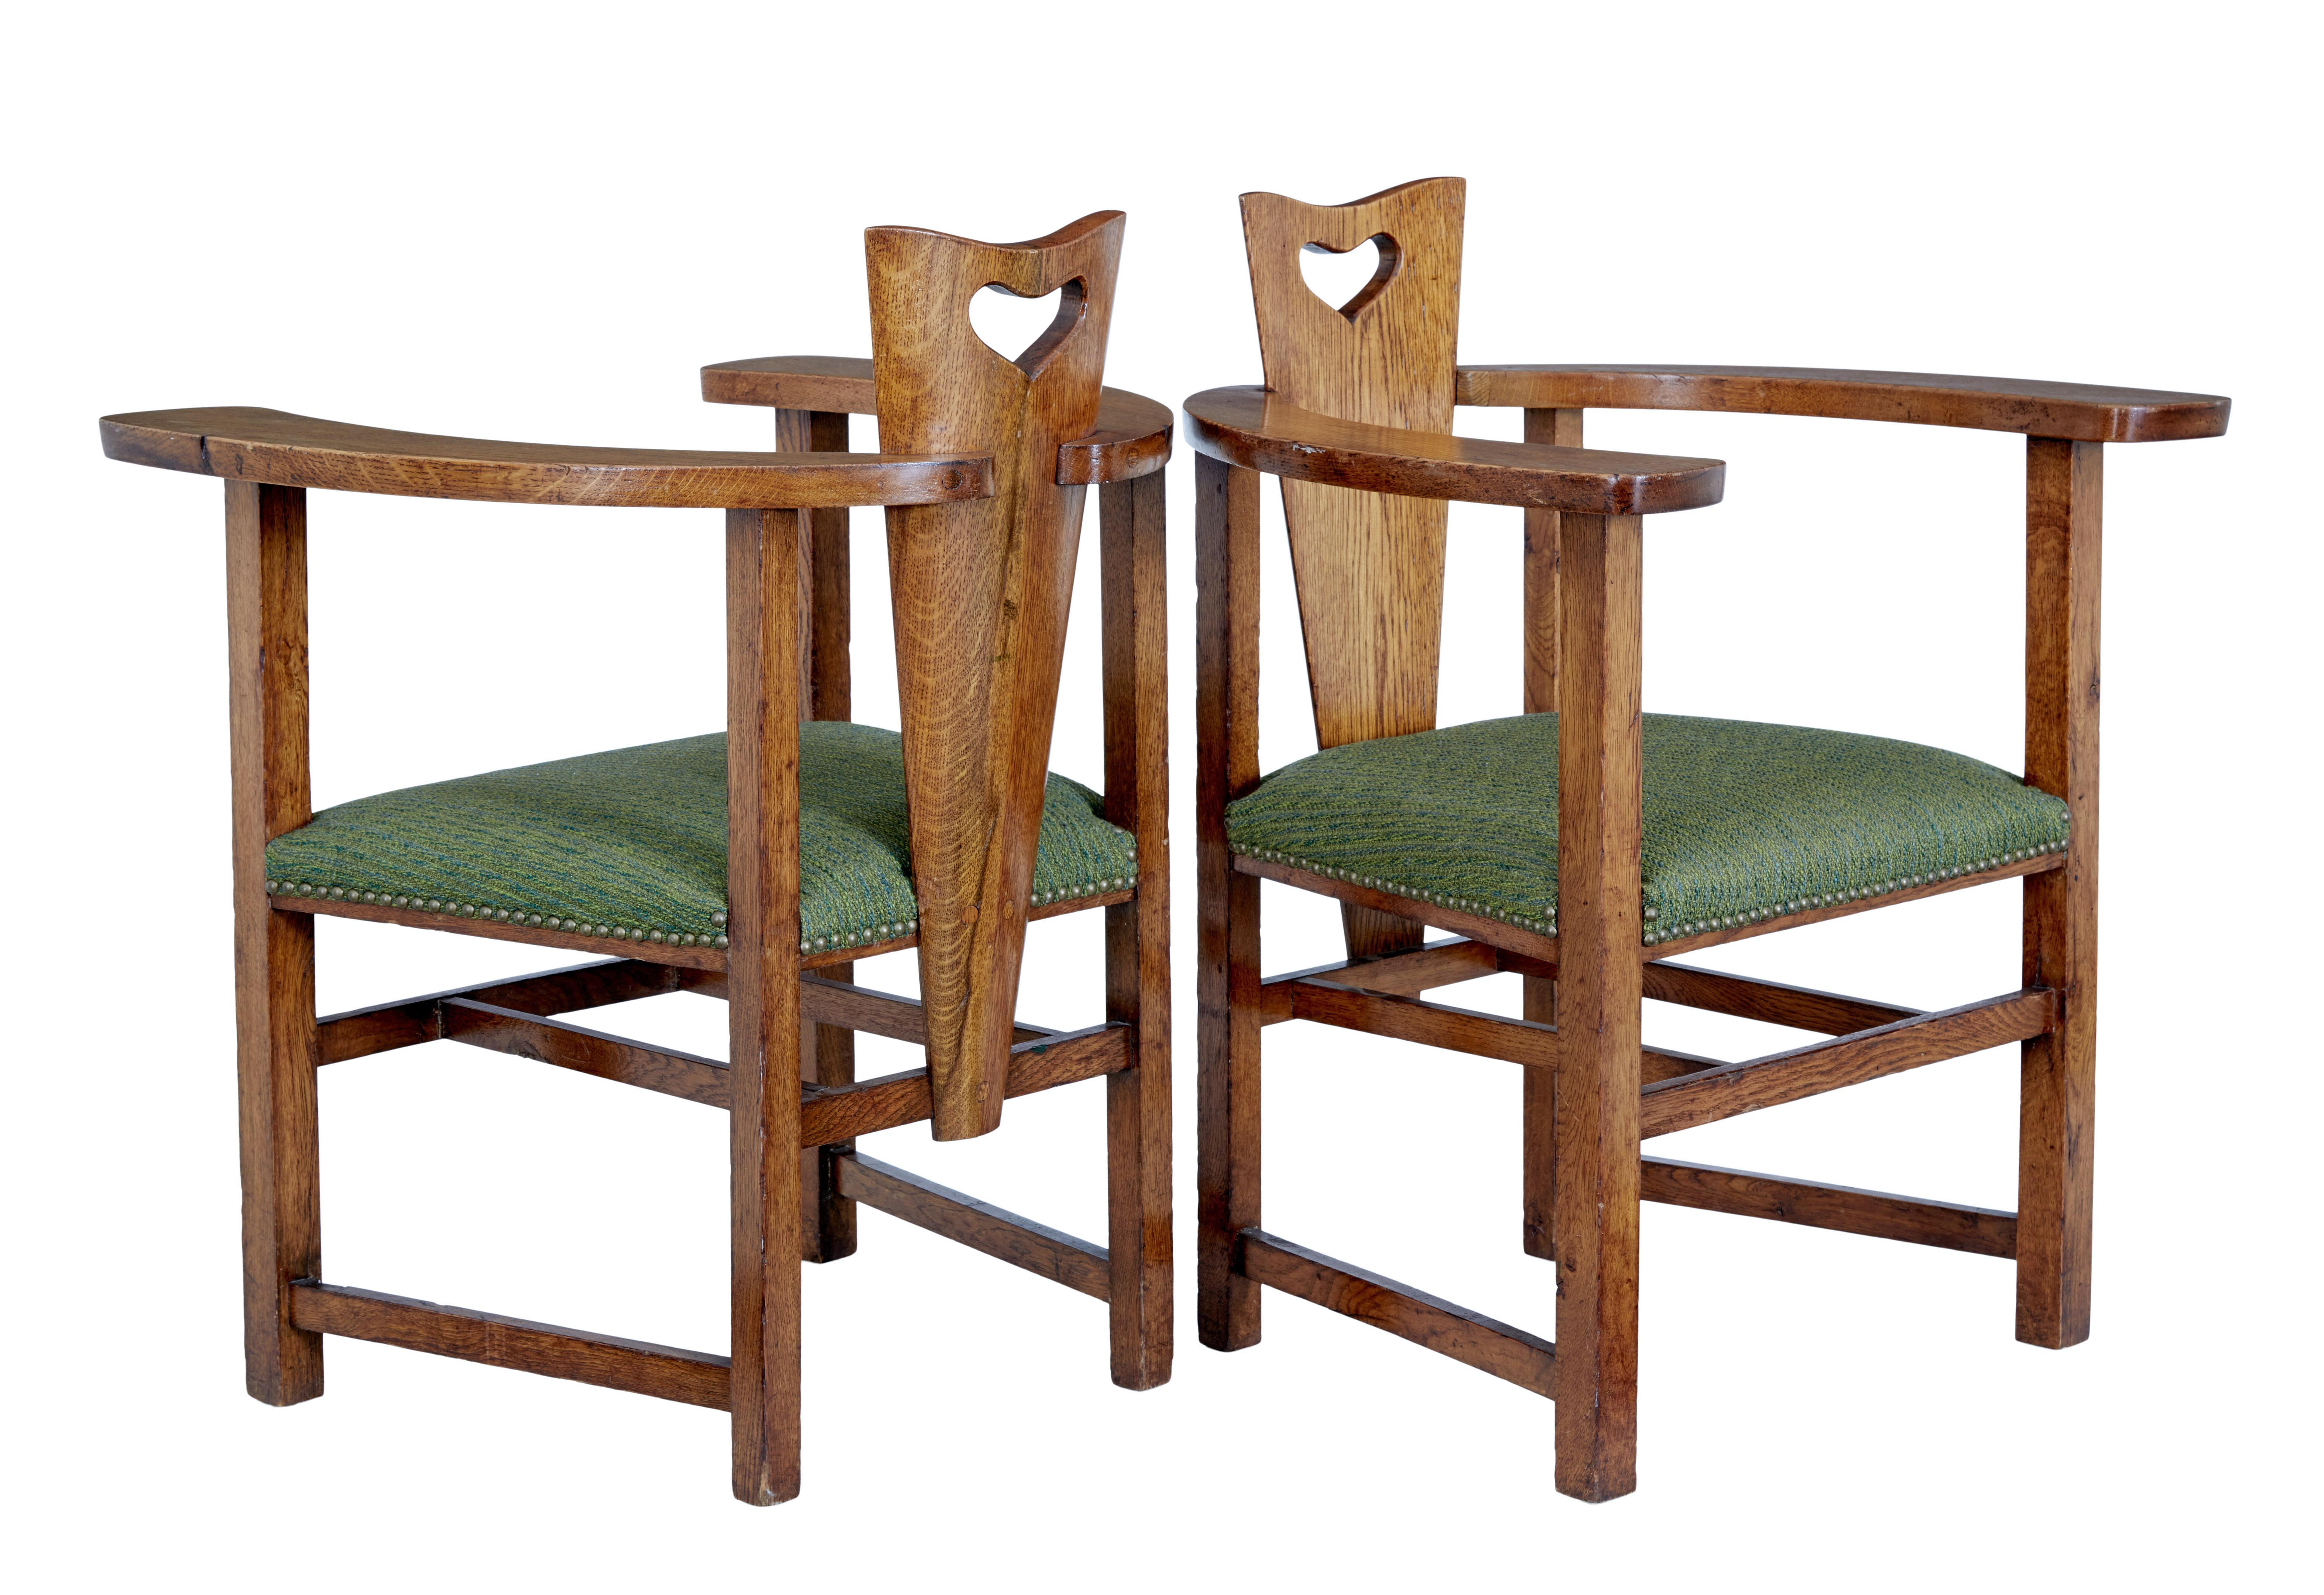 Pair of 19th century oak Arts & Crafts armchairs circa 1890.

Unusual shaped pair of english arts and crafts armchairs. Shaped backs with heart shaped handle, these link to the swooping wide arm. Standing on straight legs united by stretchers.